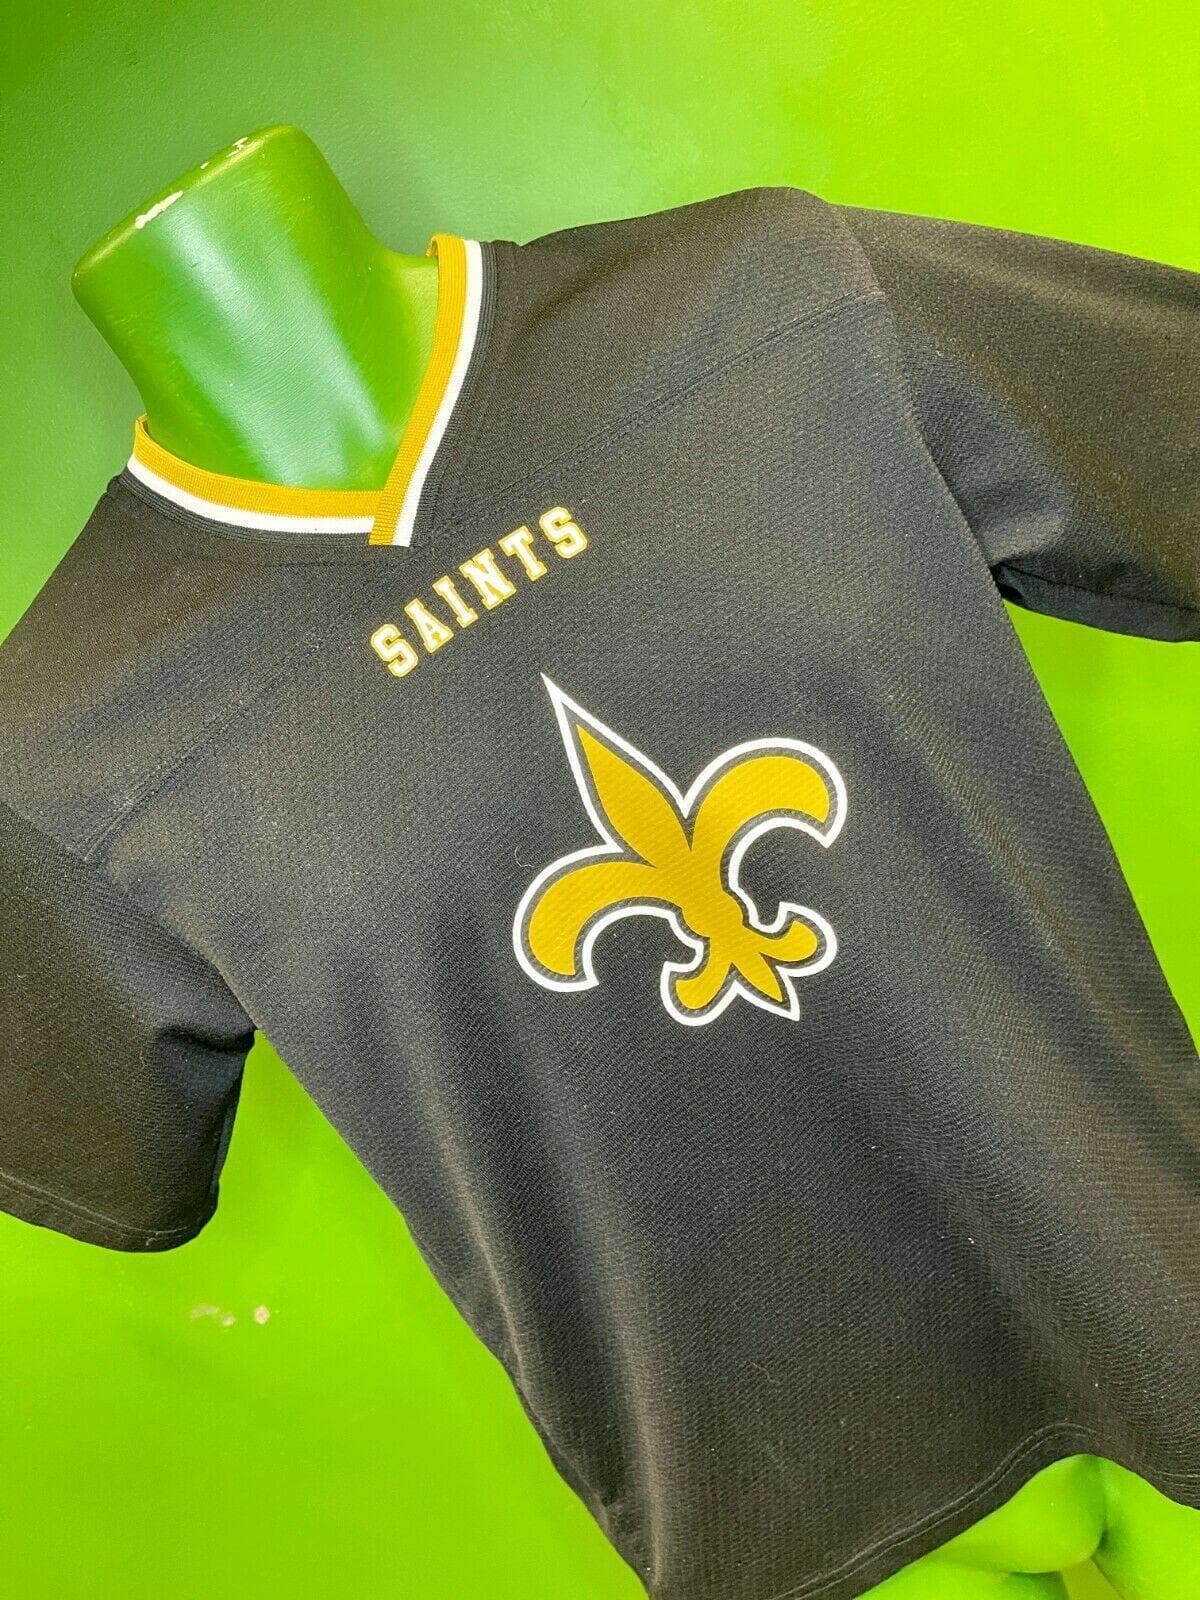 NFL New Orleans Saints Jersey-Style Top Vintage Youth Medium 10-12